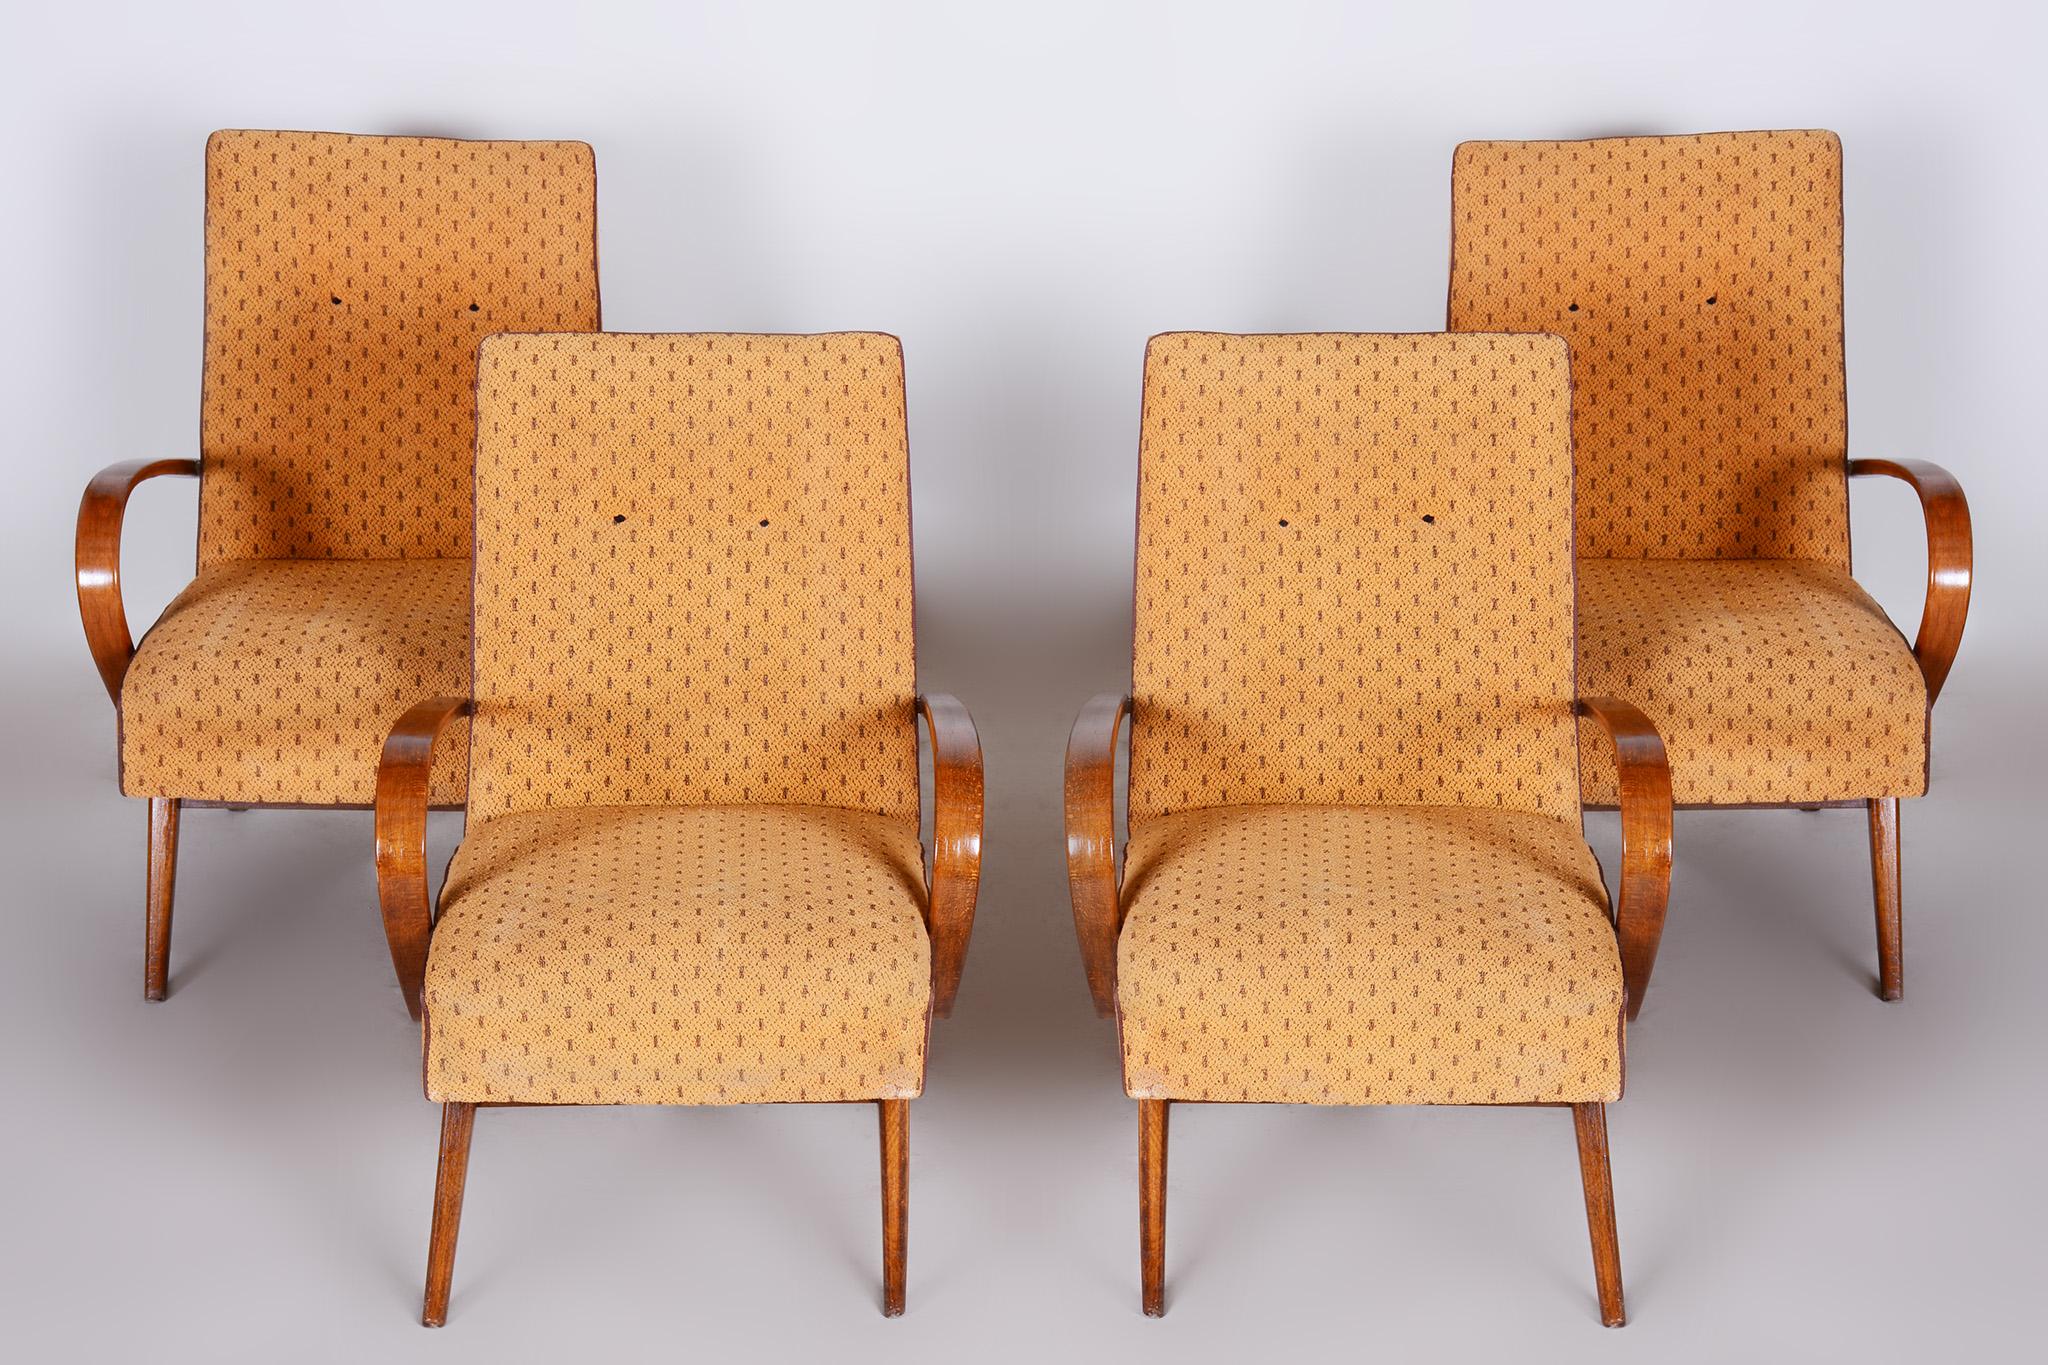 Four Yellow Mid Century Armchairs Made in 1950s Czechia, Original Condition In Good Condition For Sale In Horomerice, CZ